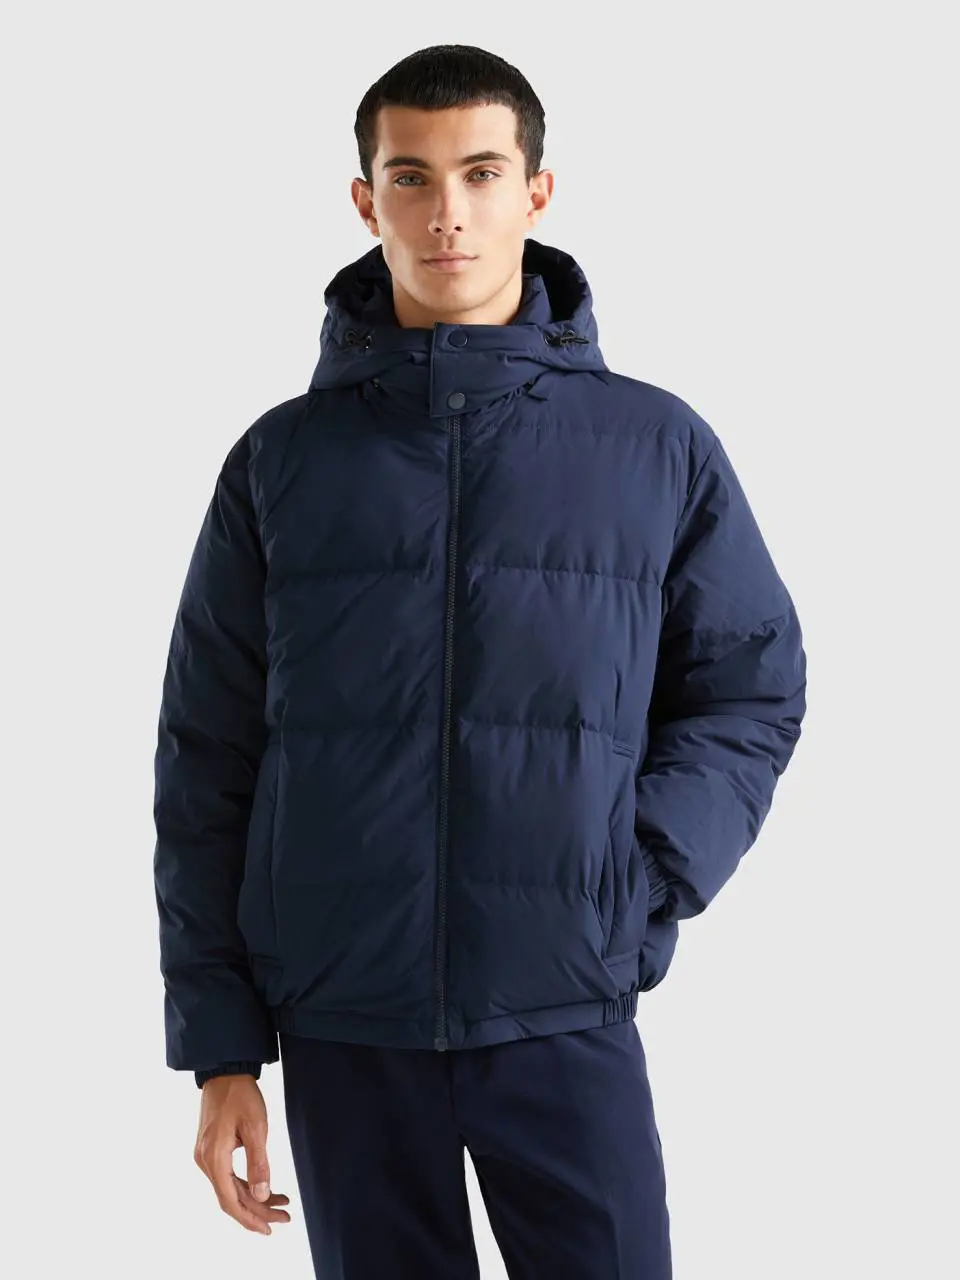 Benetton padded jacket with removable hood. 1